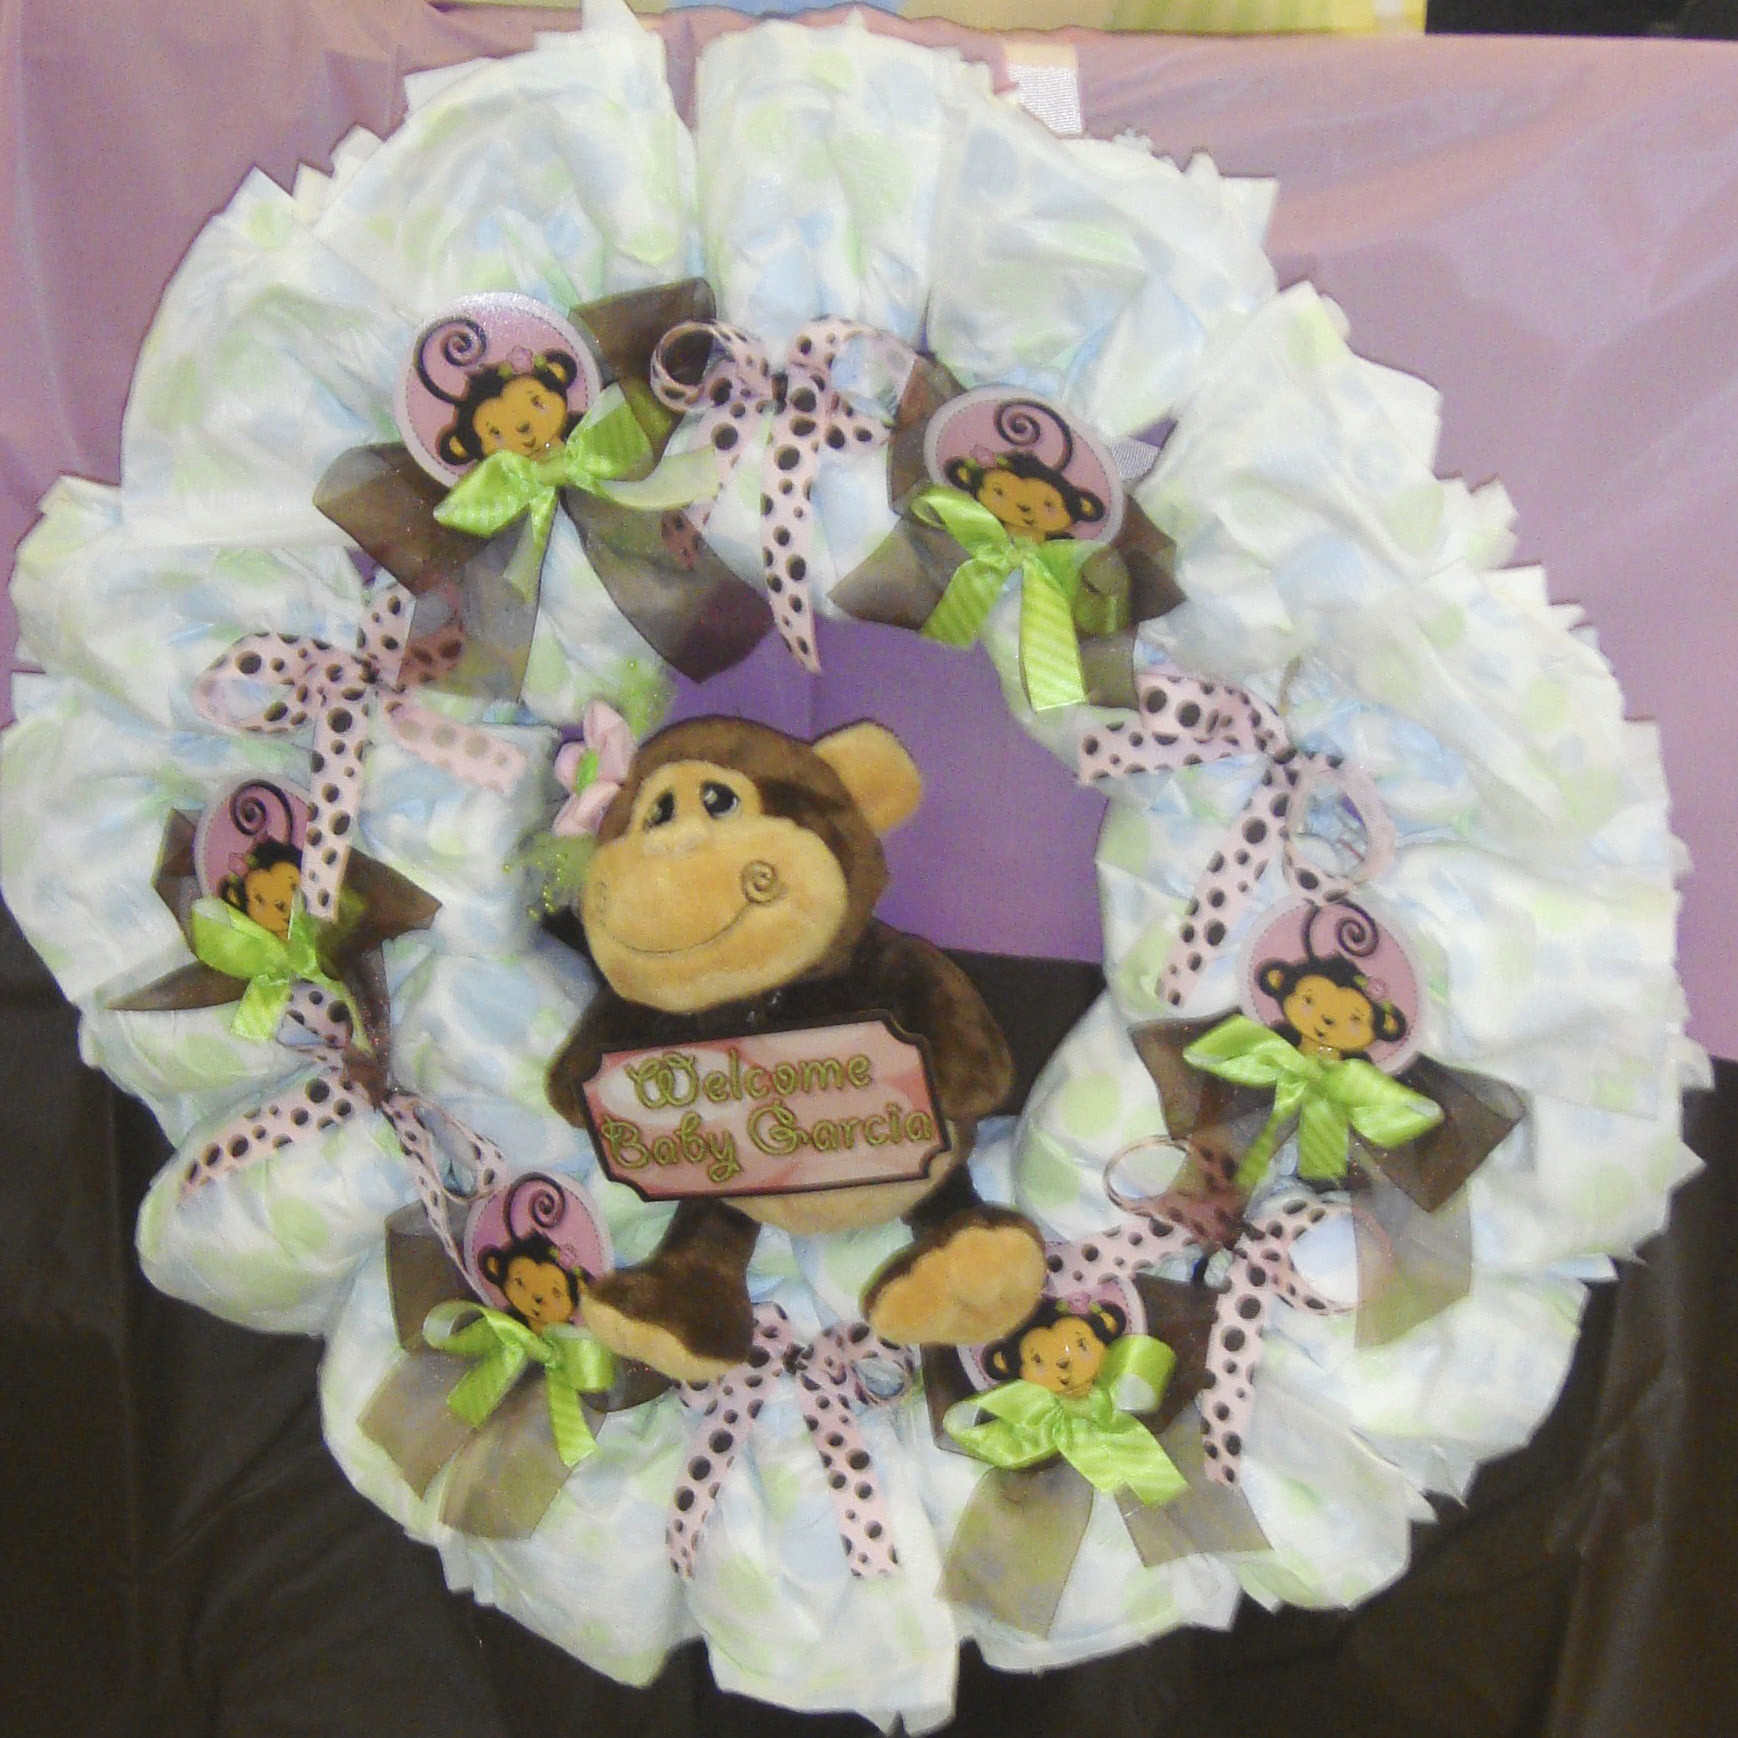 Diaper Baby Shower Gift Ideas
 Easy DIY Baby Shower Gifts Diaper Wreath Ideas